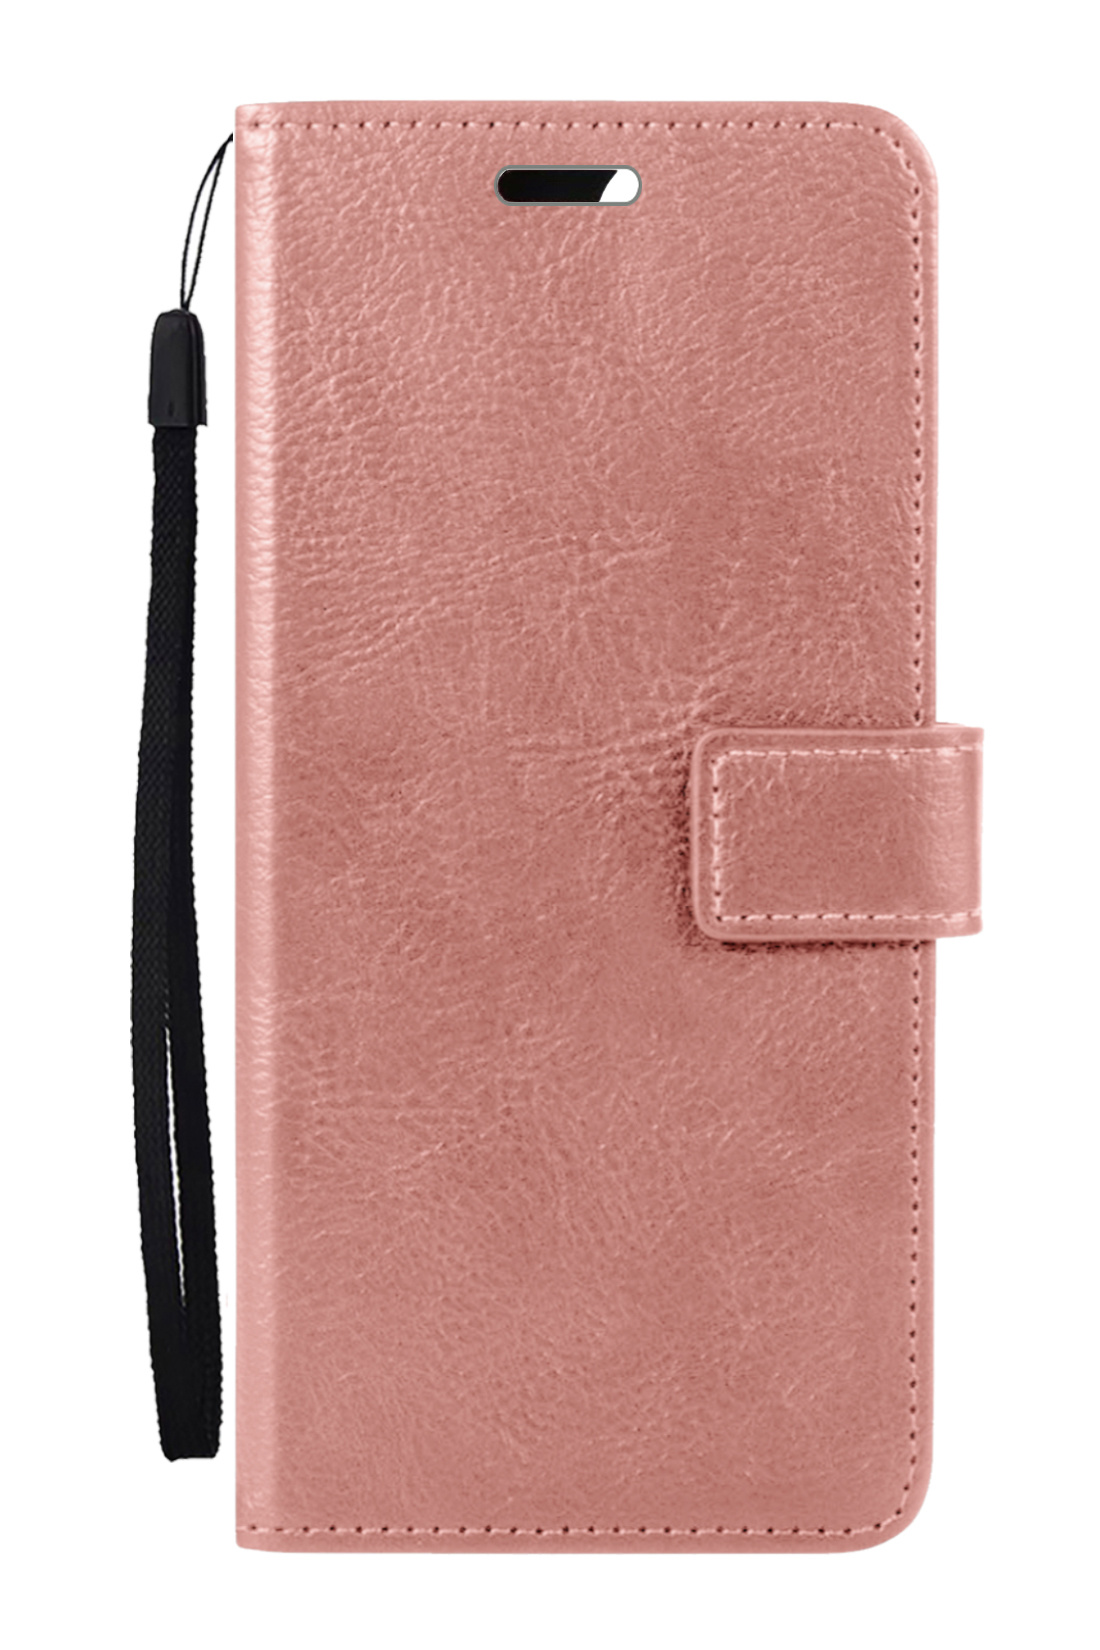 OPPO A17 Hoes Bookcase Flipcase Book Cover - OPPO A17 Hoesje Book Case - Rose Goud